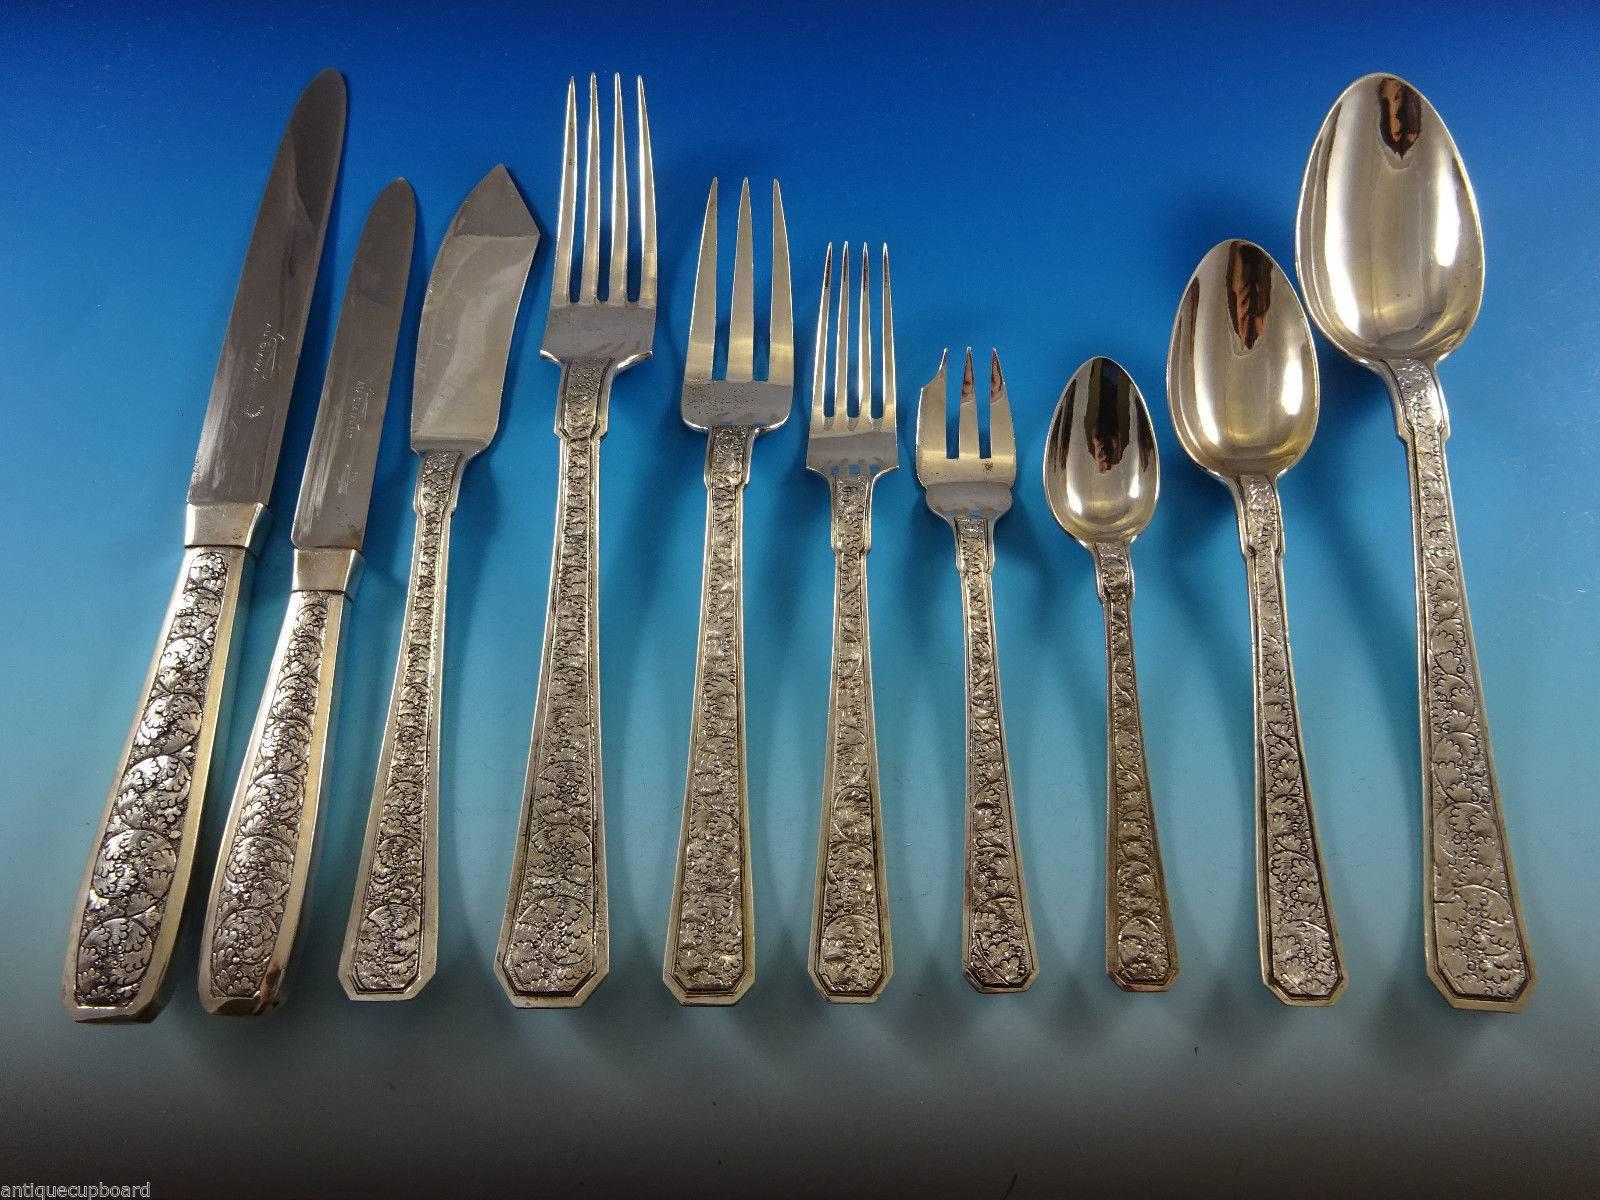 Handmade sterling silver (tested) Chinese or Japanese flatware set with fabulous scrolling engraved detail, circa 1930s. Hand chased and heavy. This 142 piece set includes: 12 dinner knives, 9 1/2